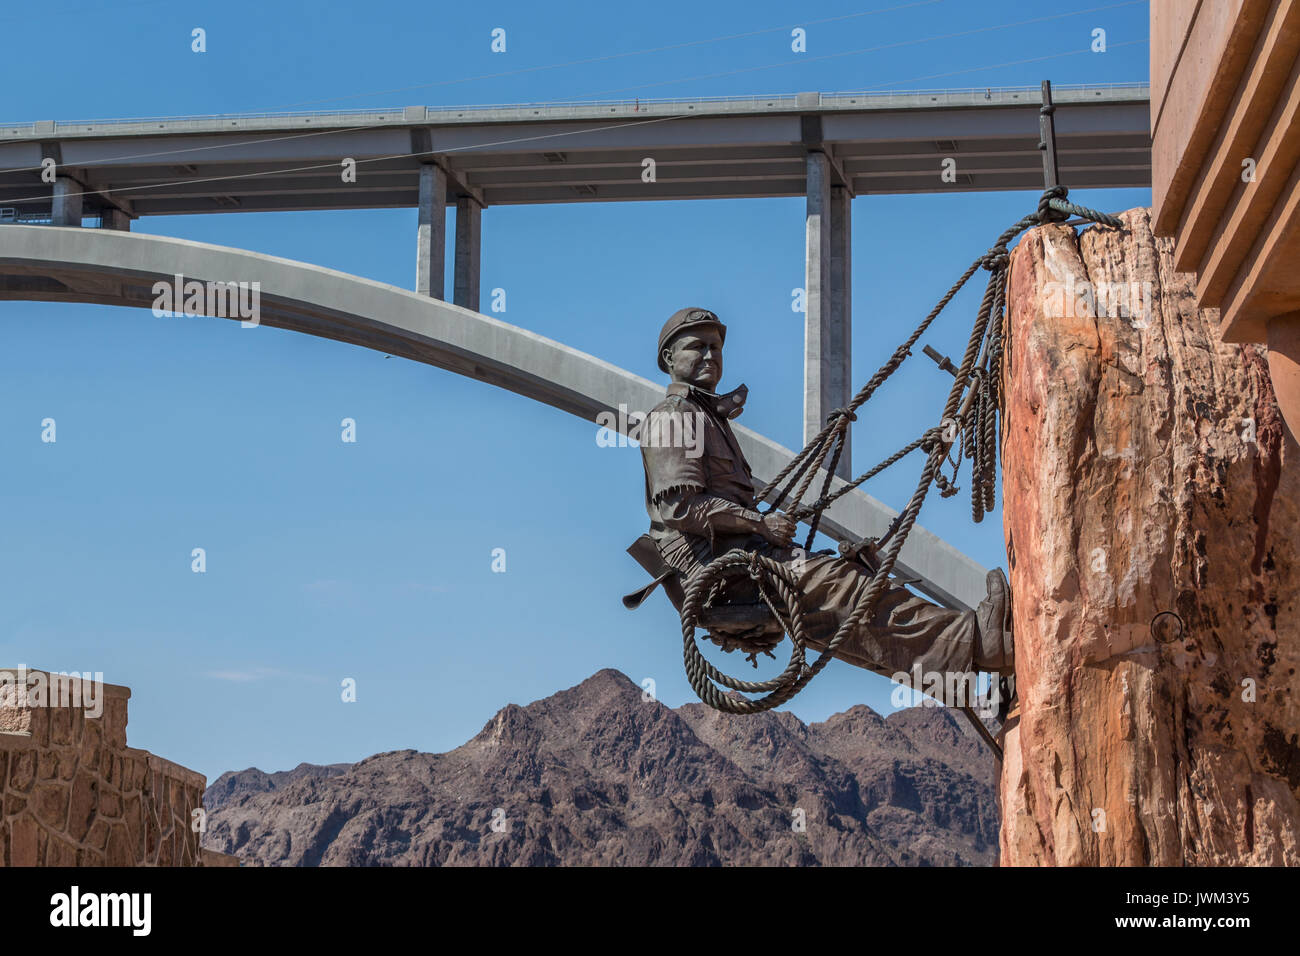 The High Scaler, a bronze figure created in the 1990s by sculptor Steven Liguori installed at the Hoover Dam, Nevada USA. Stock Photo